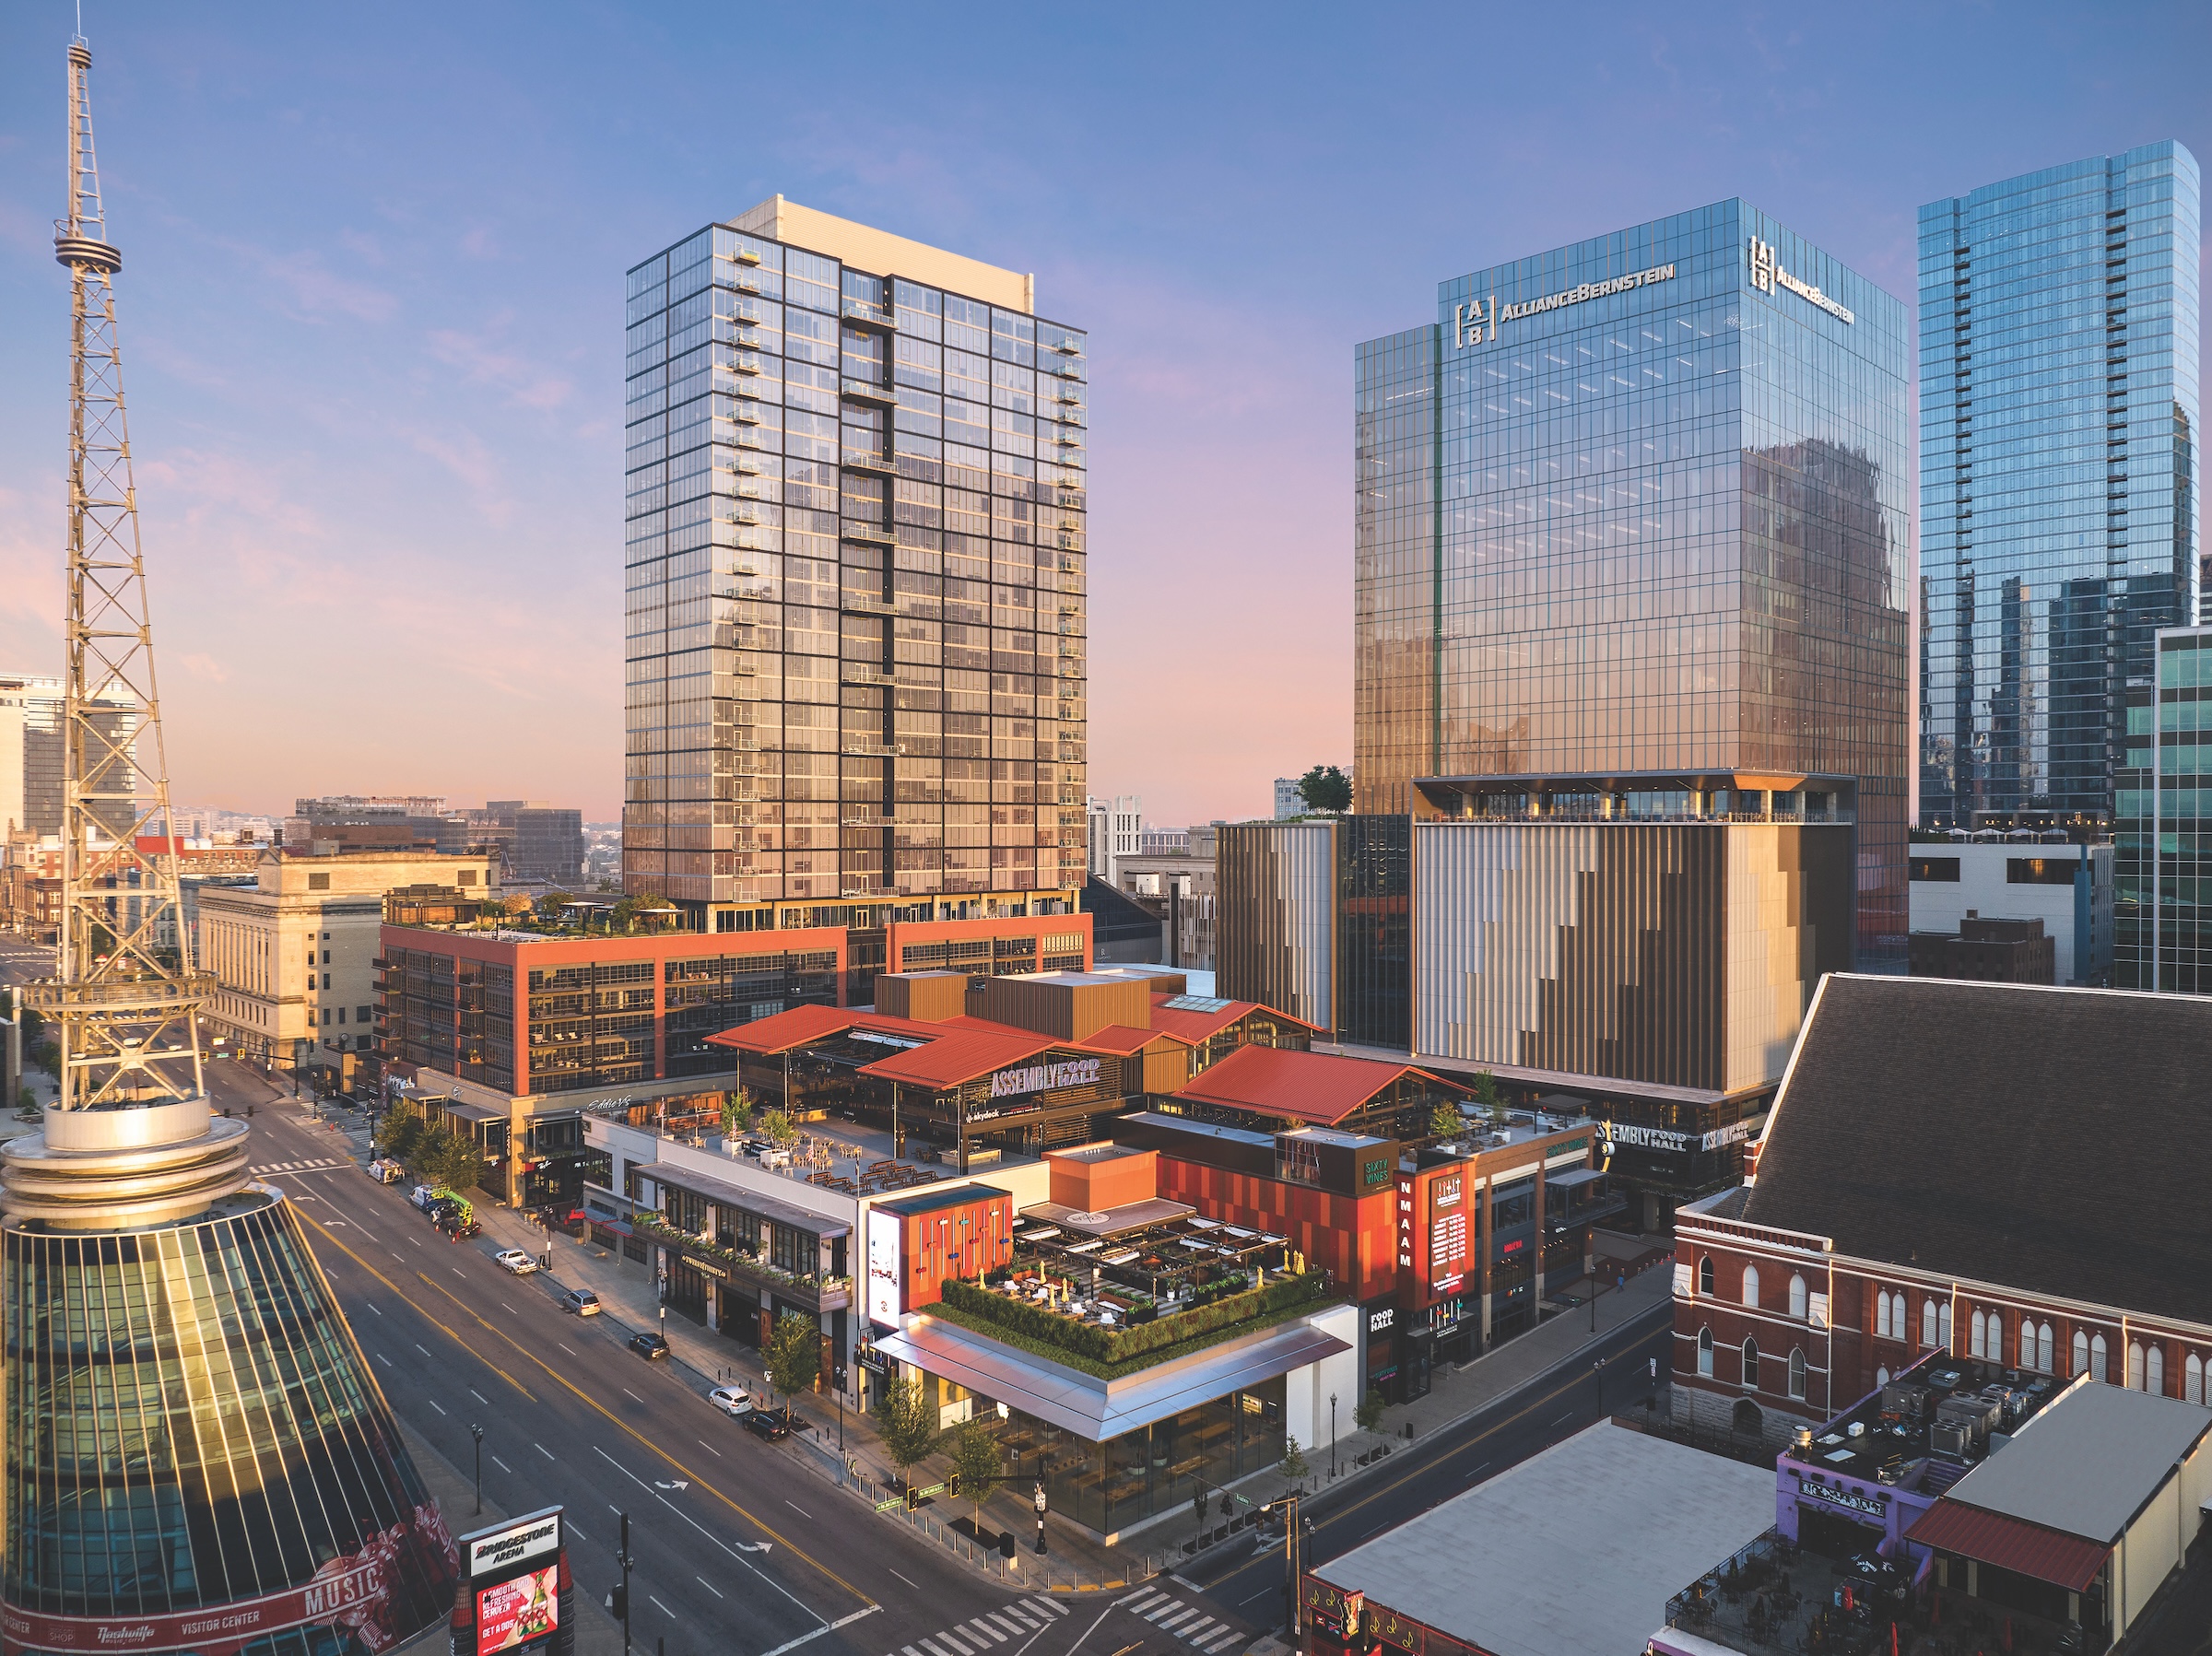 The new Nashville Live! performance and dining venue will only be blocks from Fifth + Broadway, which opened March 4, 2021,